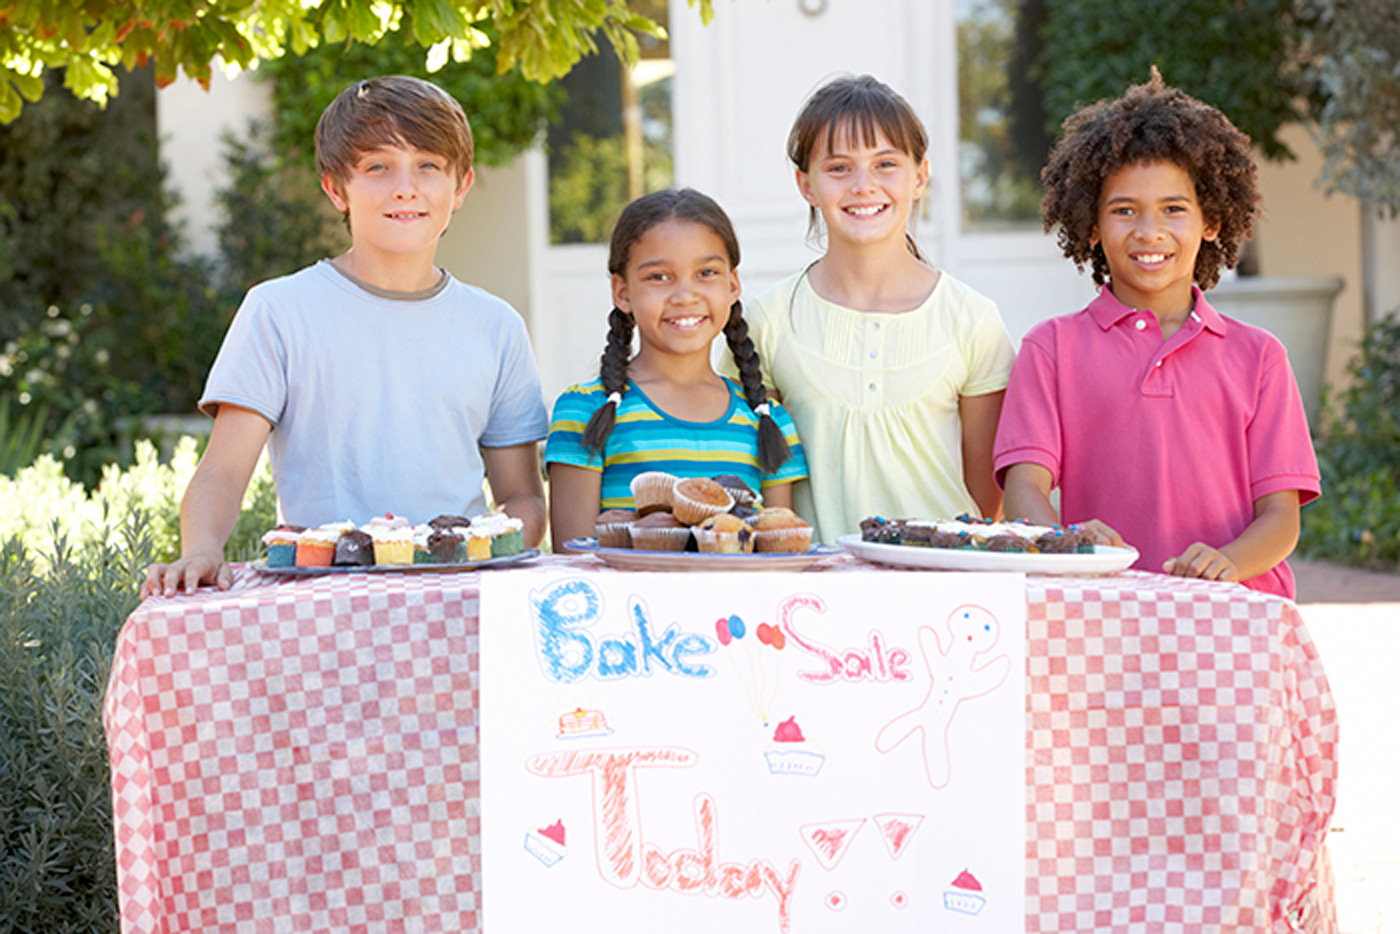 Four kids find a way to make money by starting a bake sale